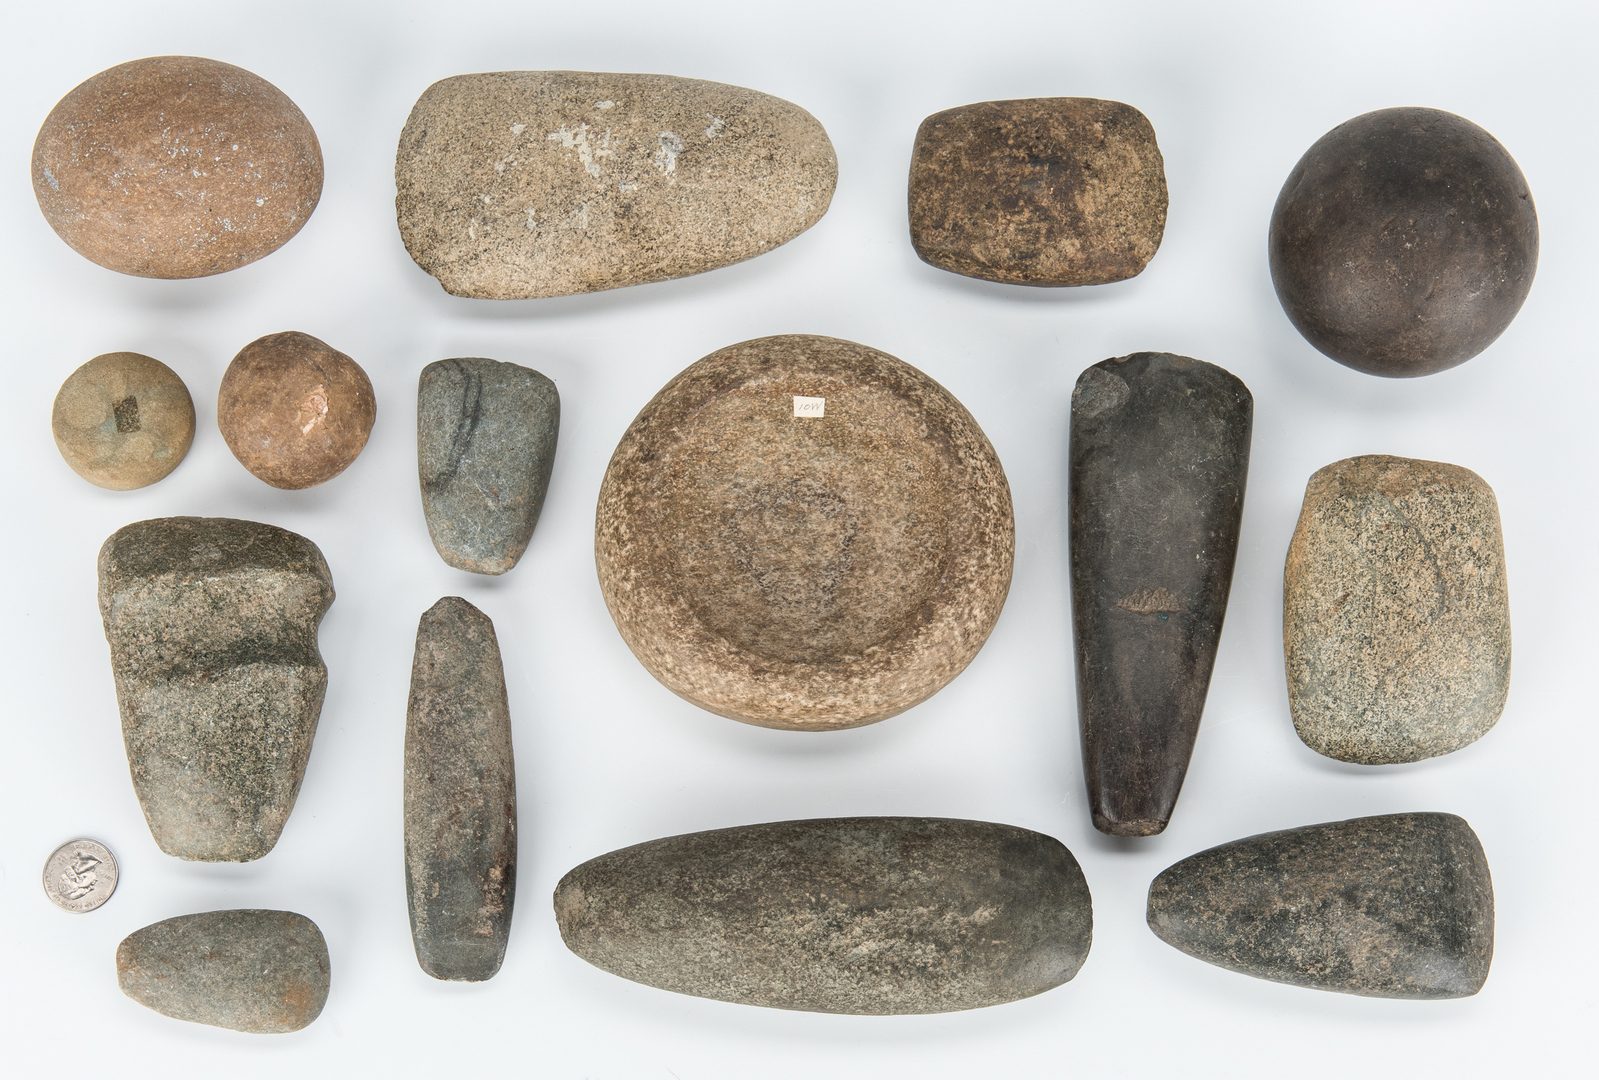 Lot 282: 15 Native American Stone Artifacts, incl. Discoidals